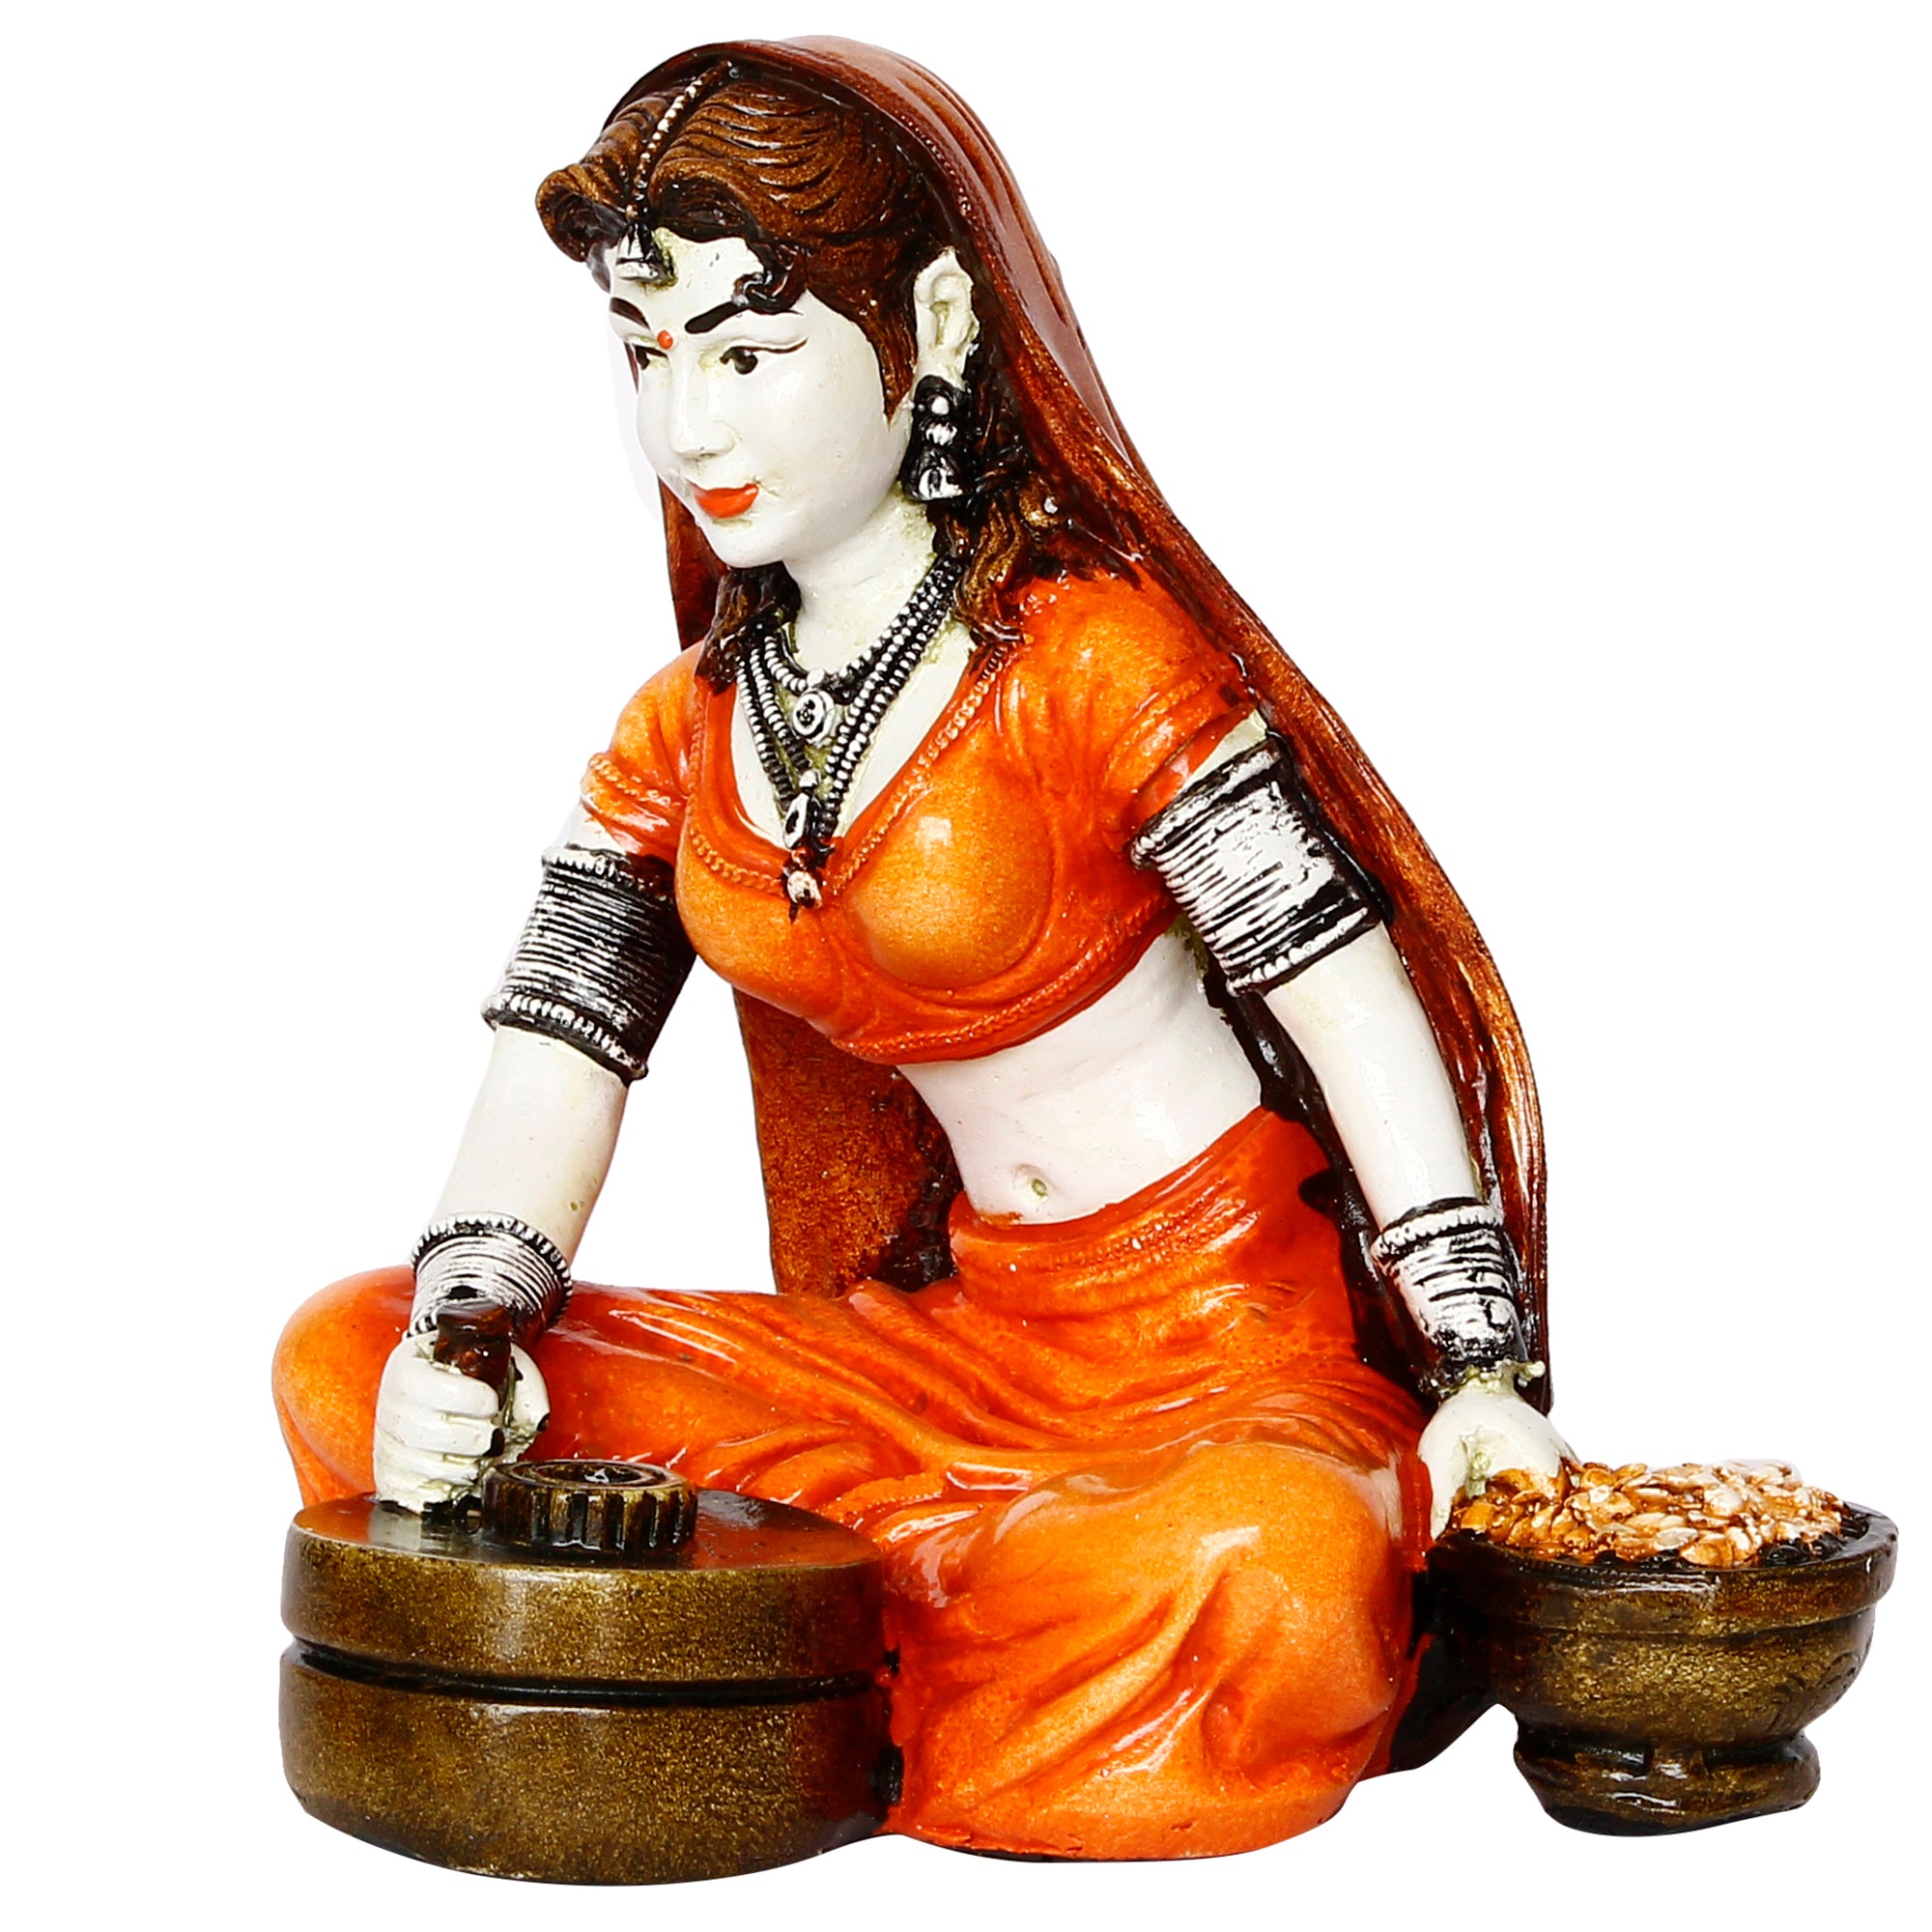 Polyresin Rajasthani Women Statue Using Traditional Flour Mill Handcrafted Human Figurine Decorative Showpiece 4